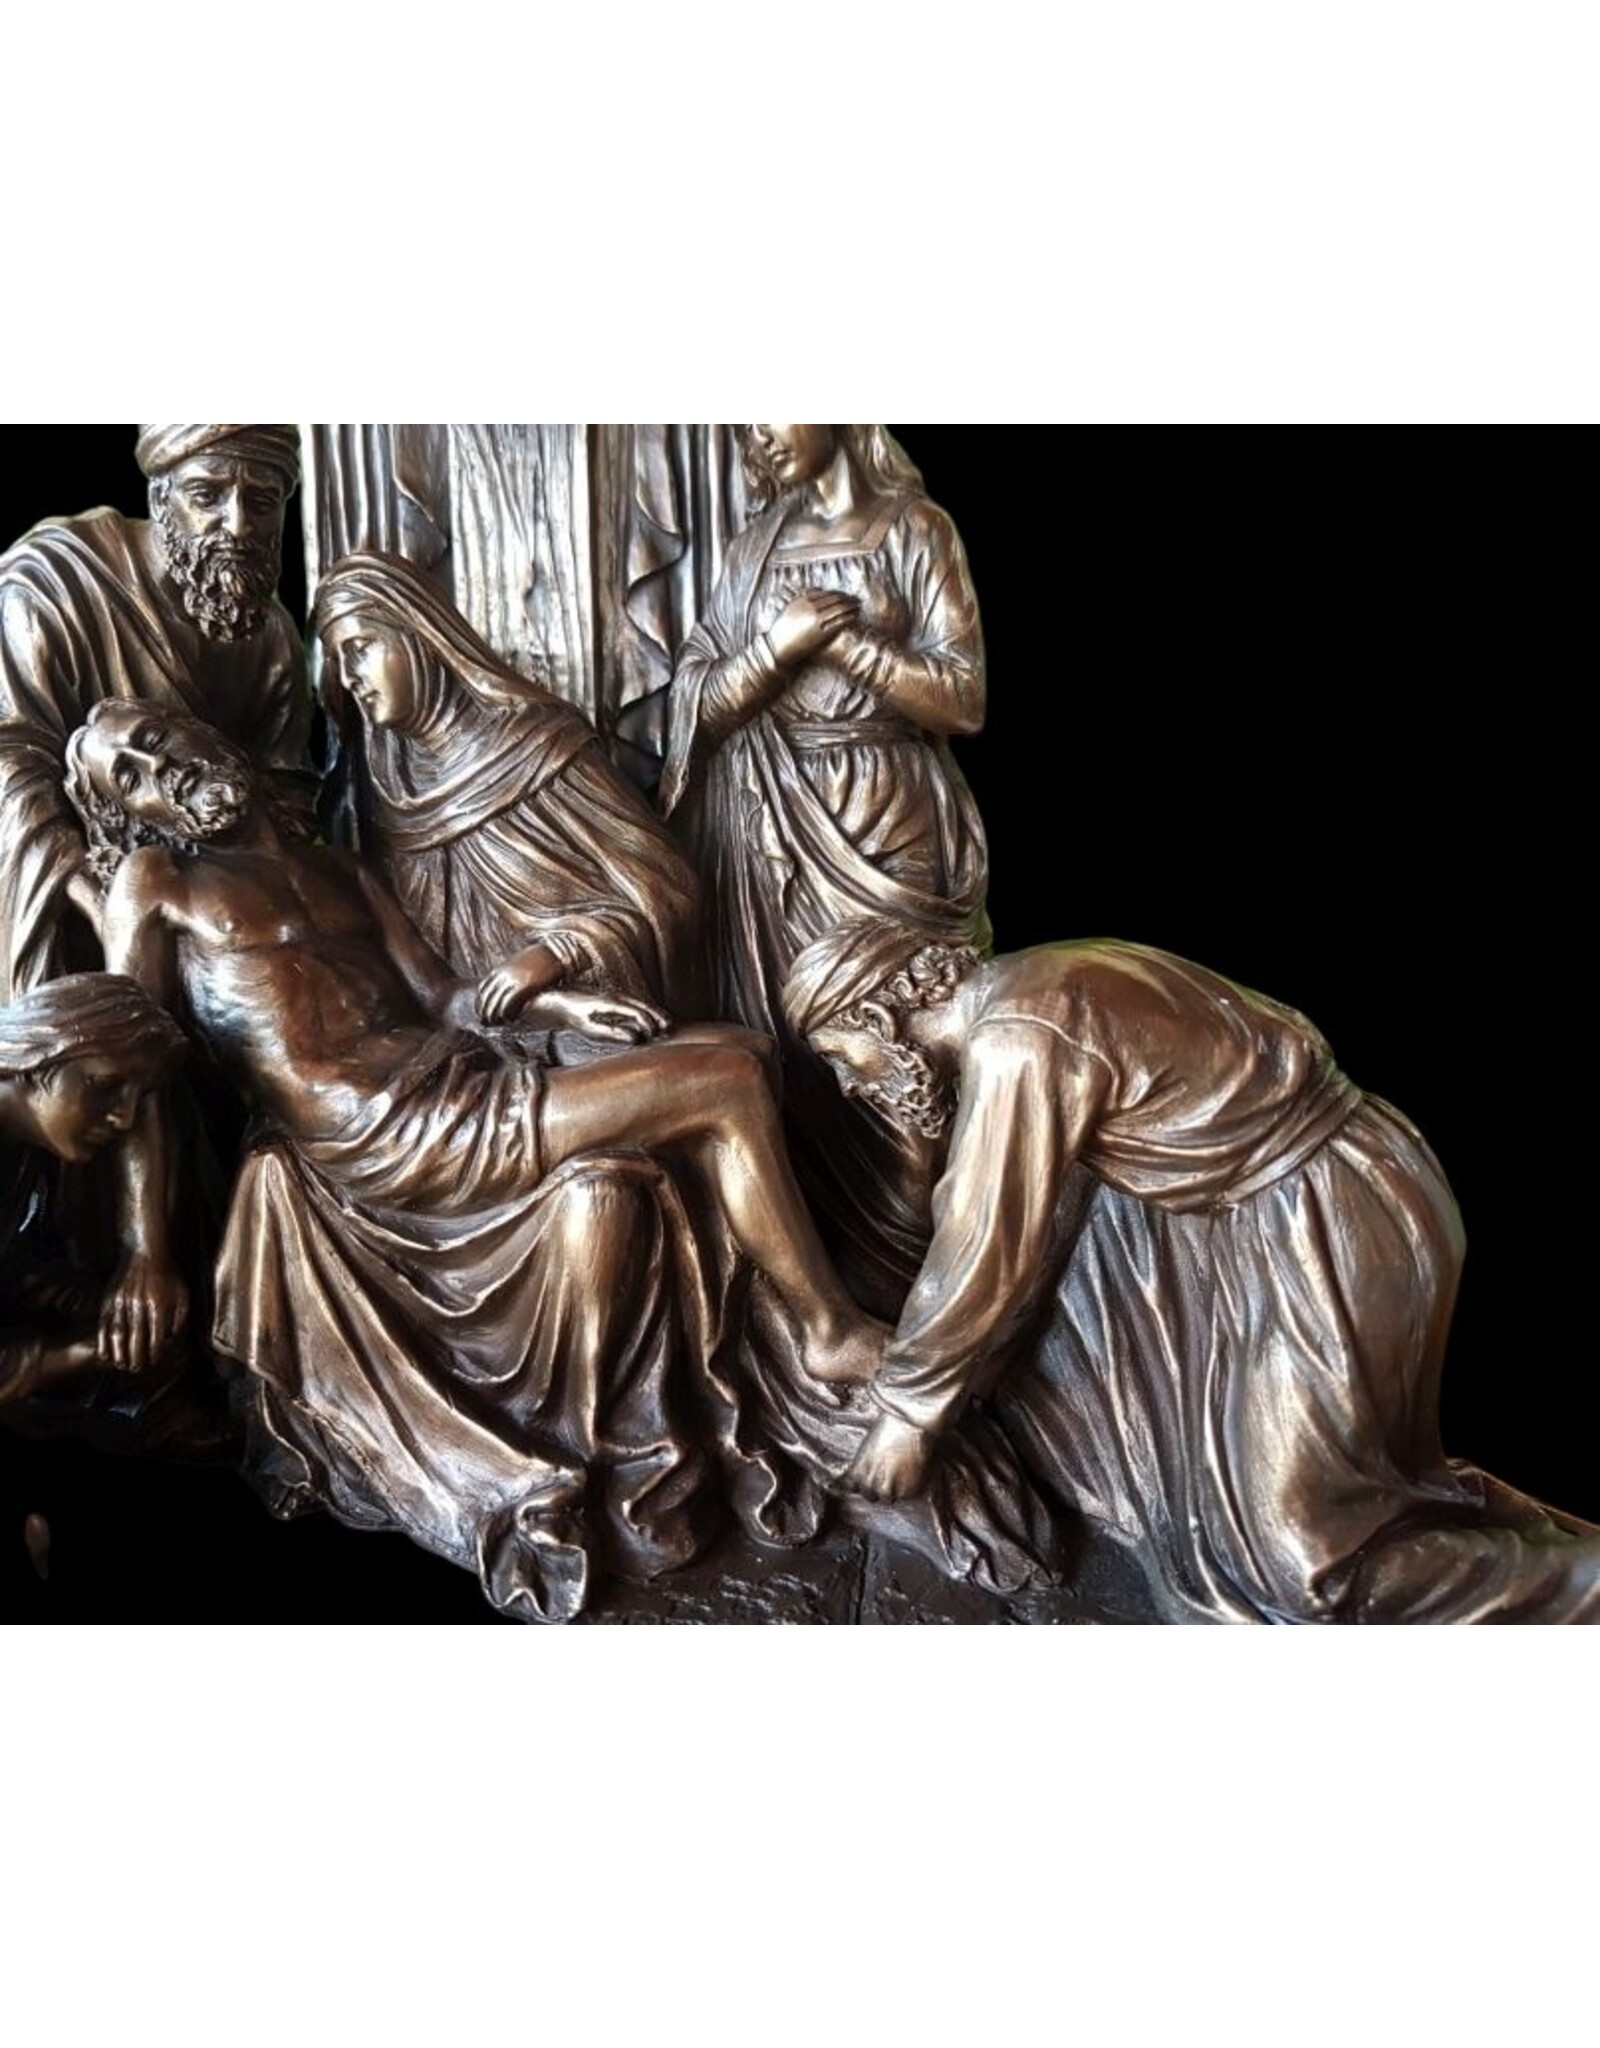 Veronese Design Giftware & Lifestyle - Jesus removed from the cross in Calvary Veronese Design